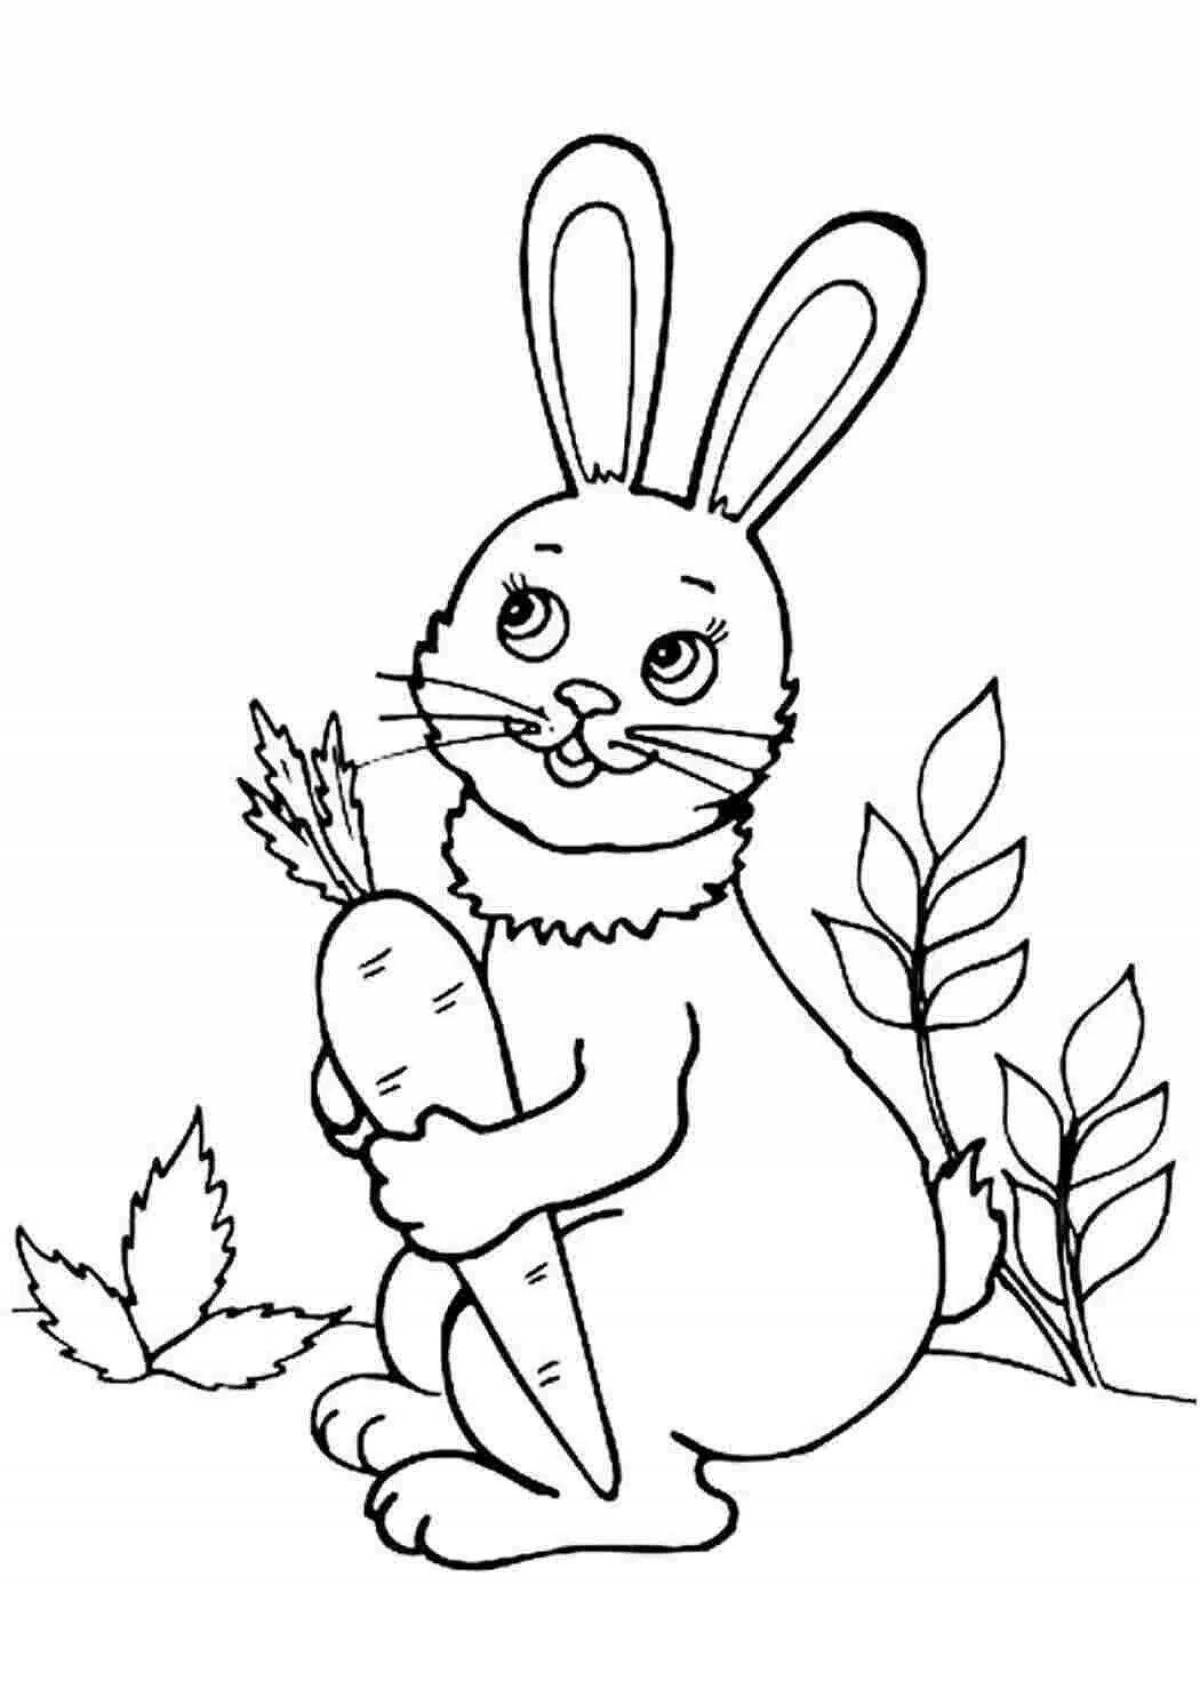 Animated rabbit drawing for kids